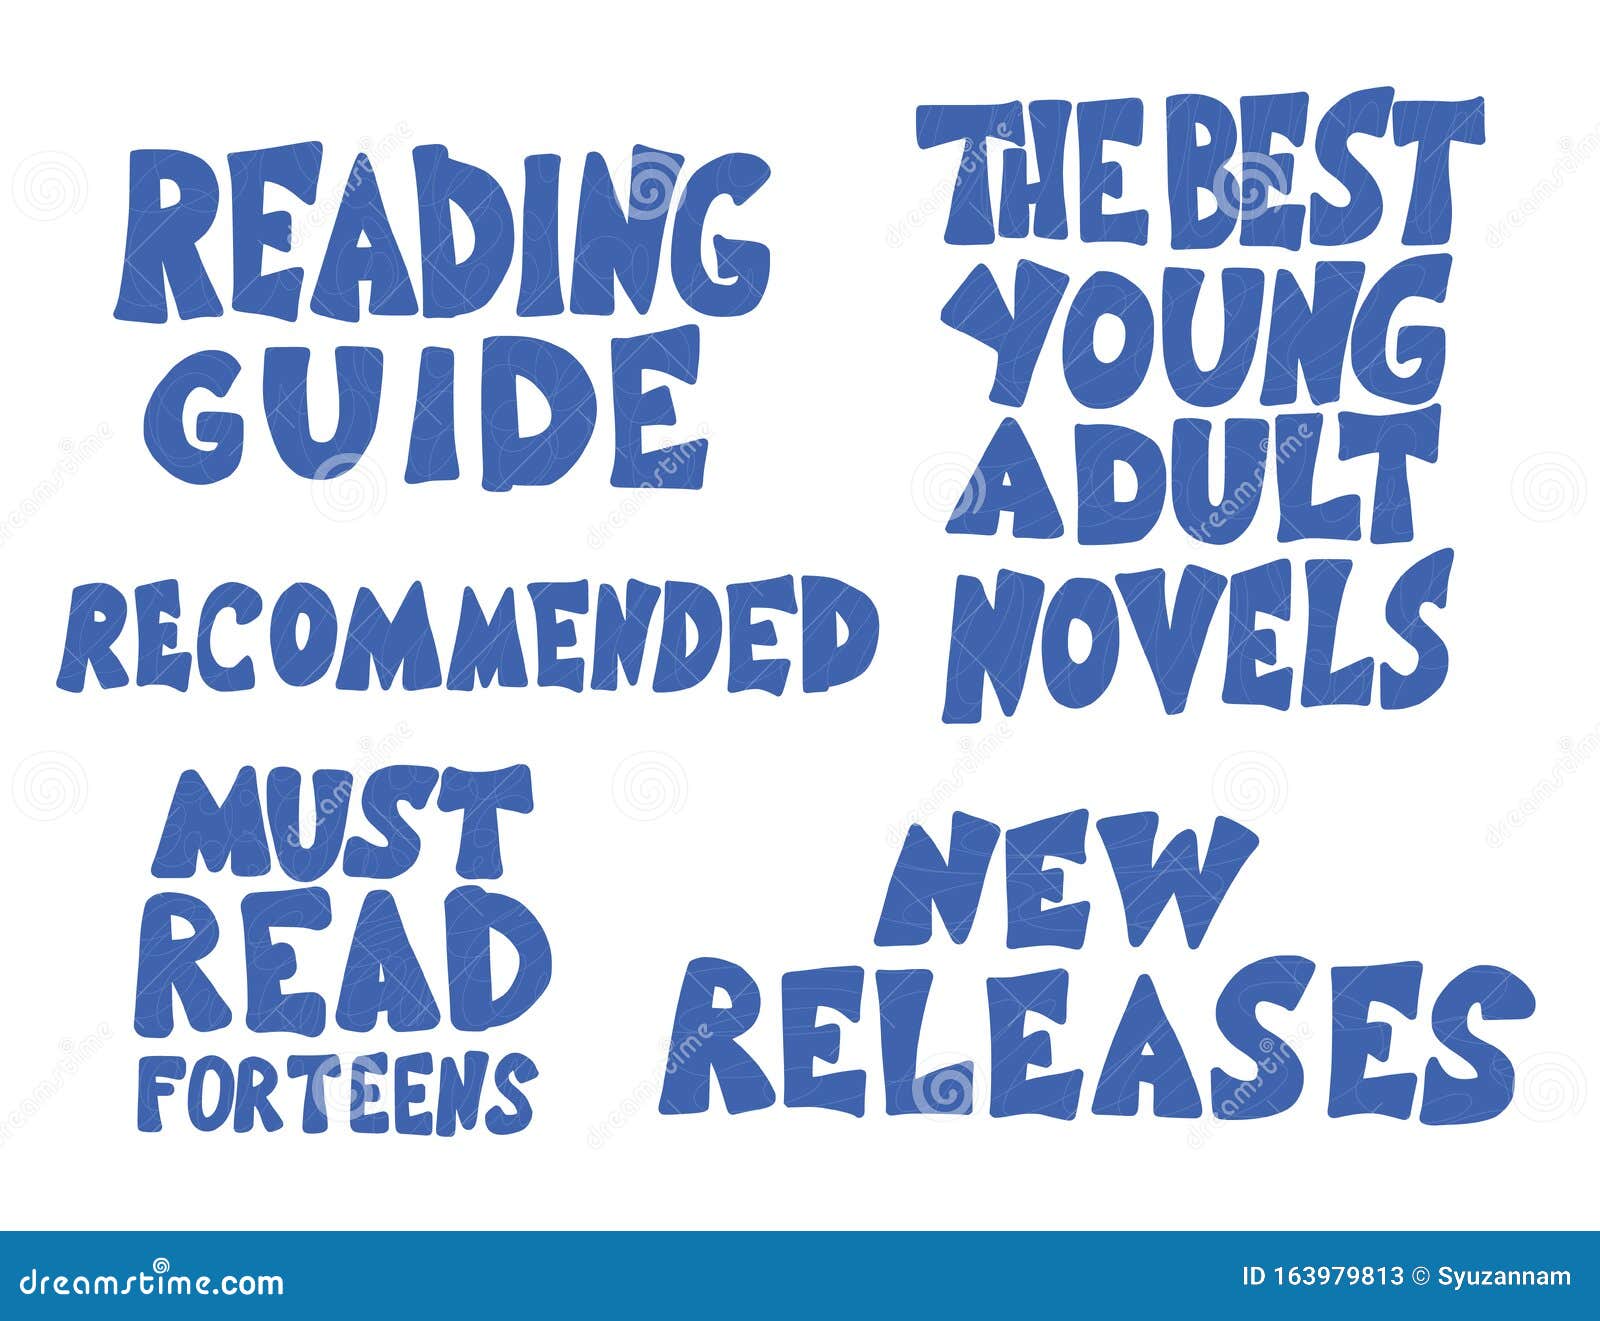 young adults book phrases set.  illustartion